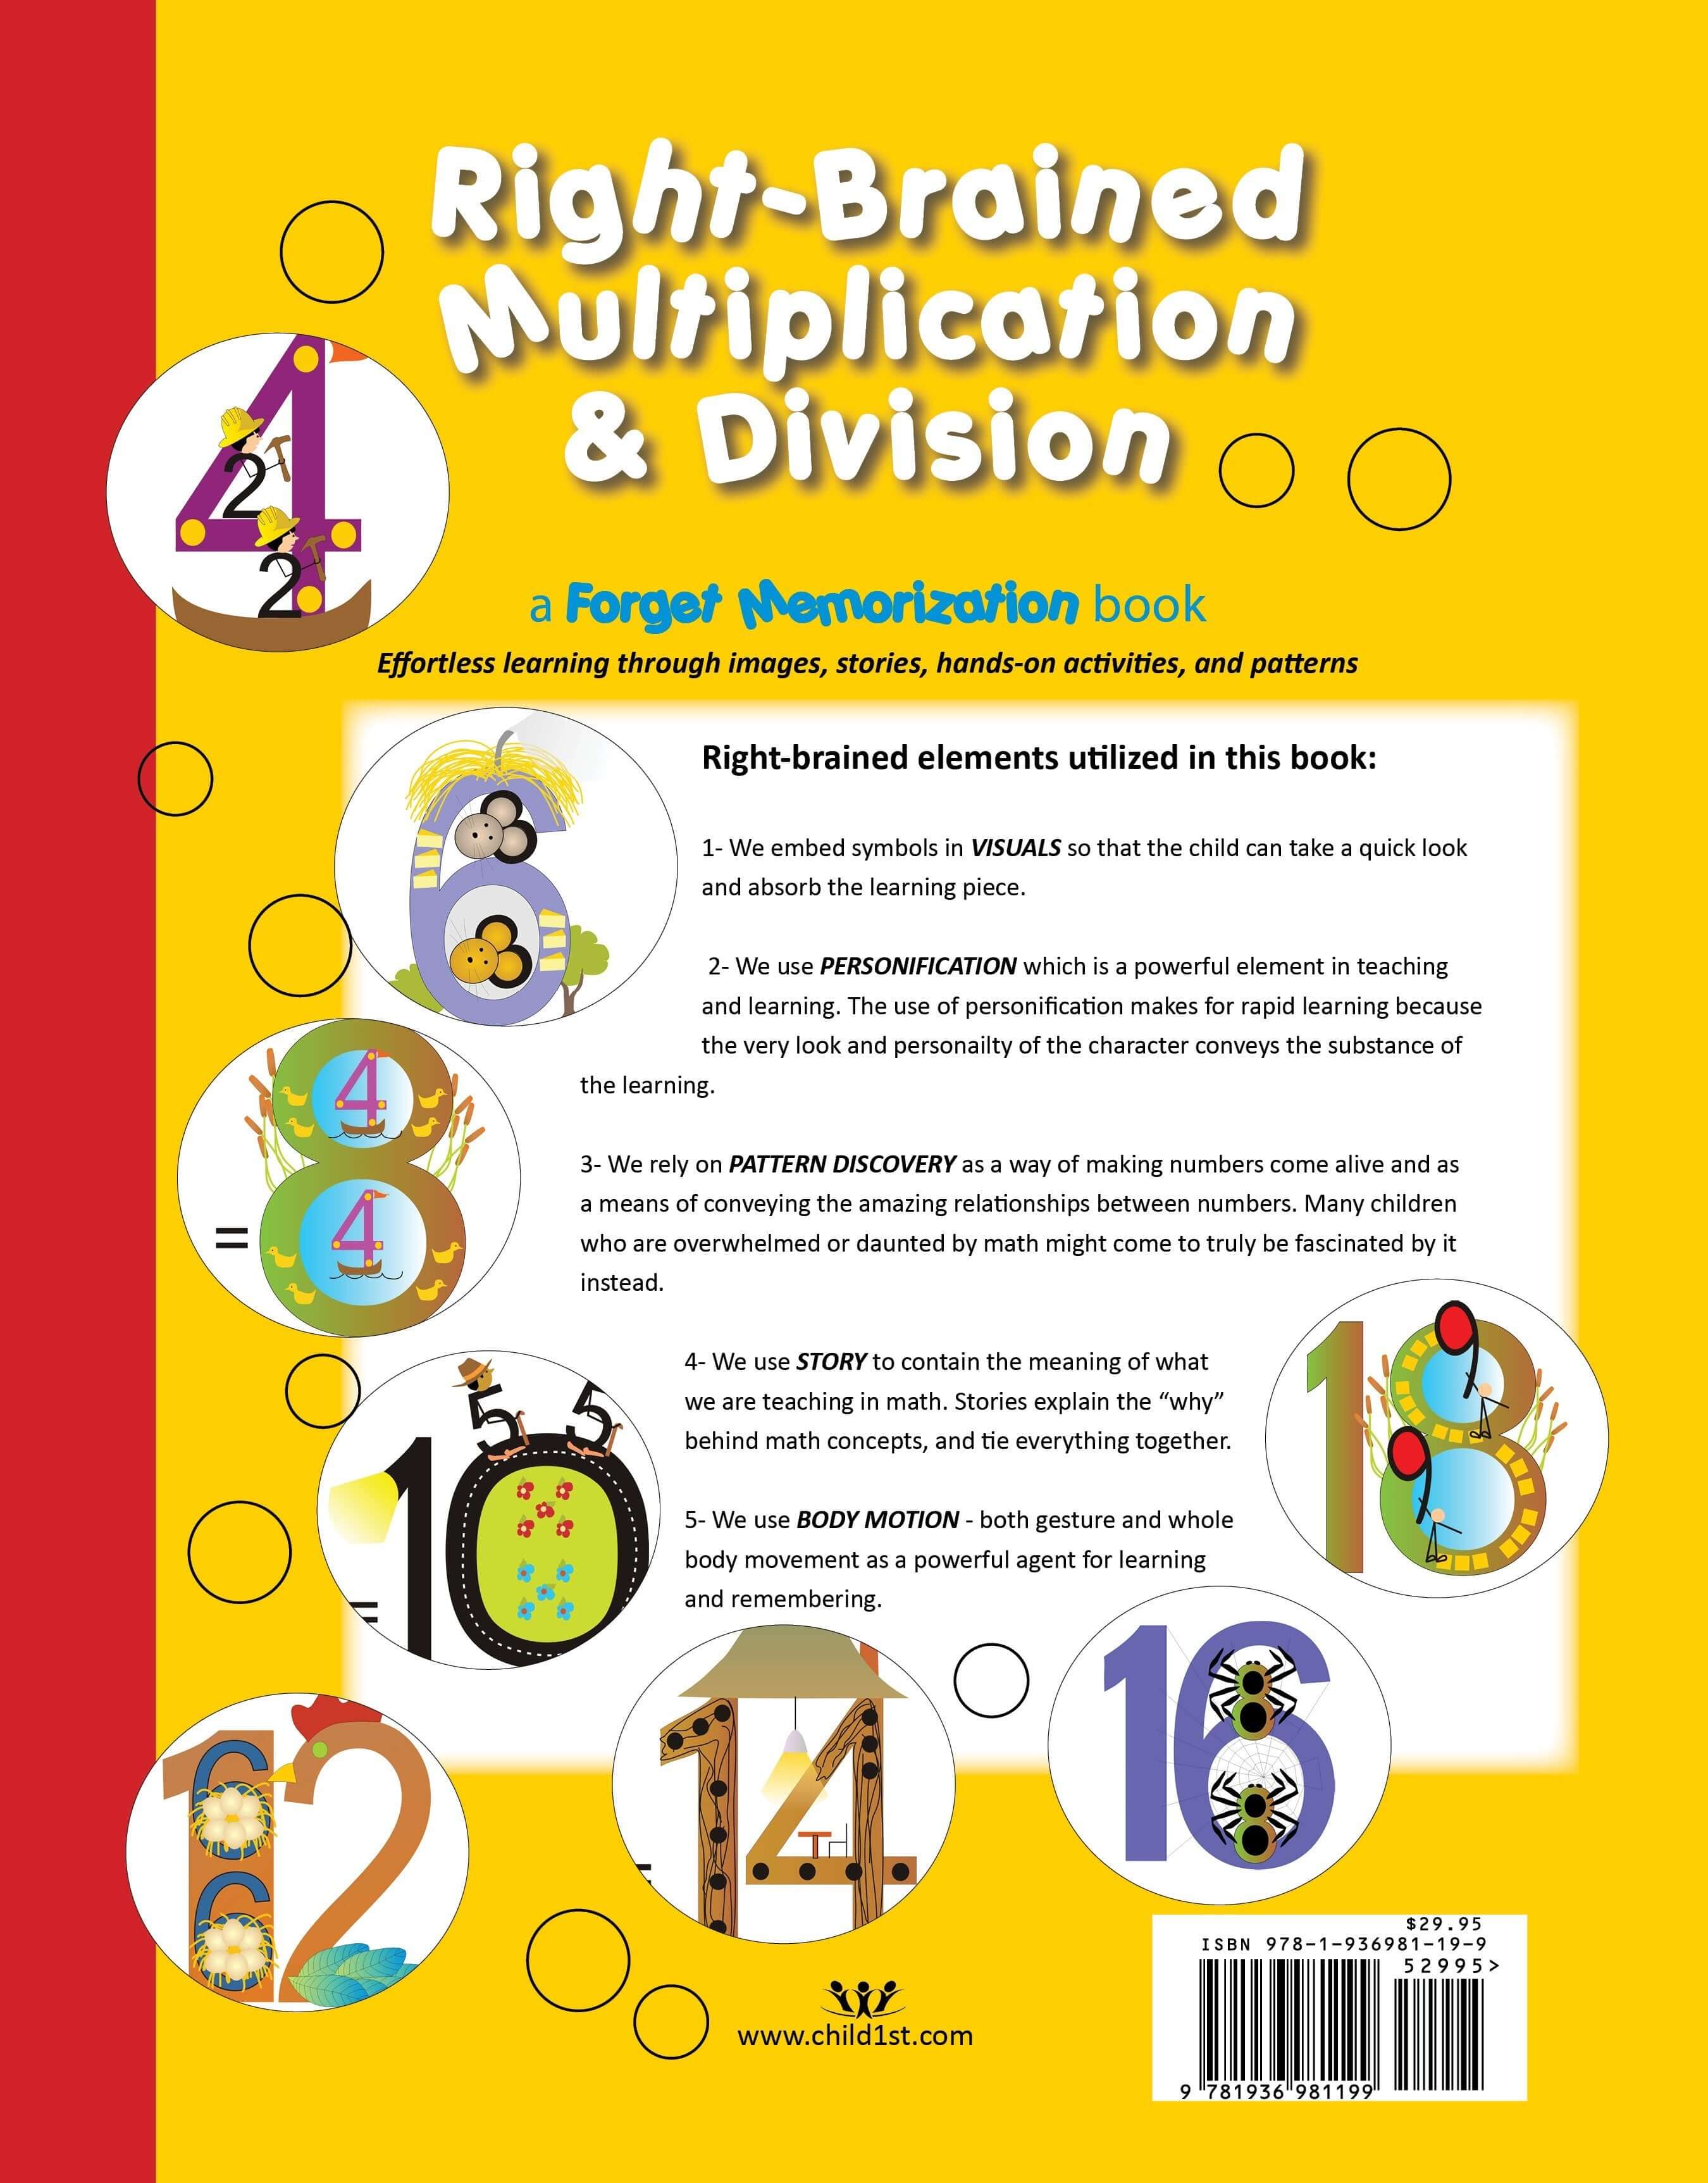 Right-Brained Multiplication & Division